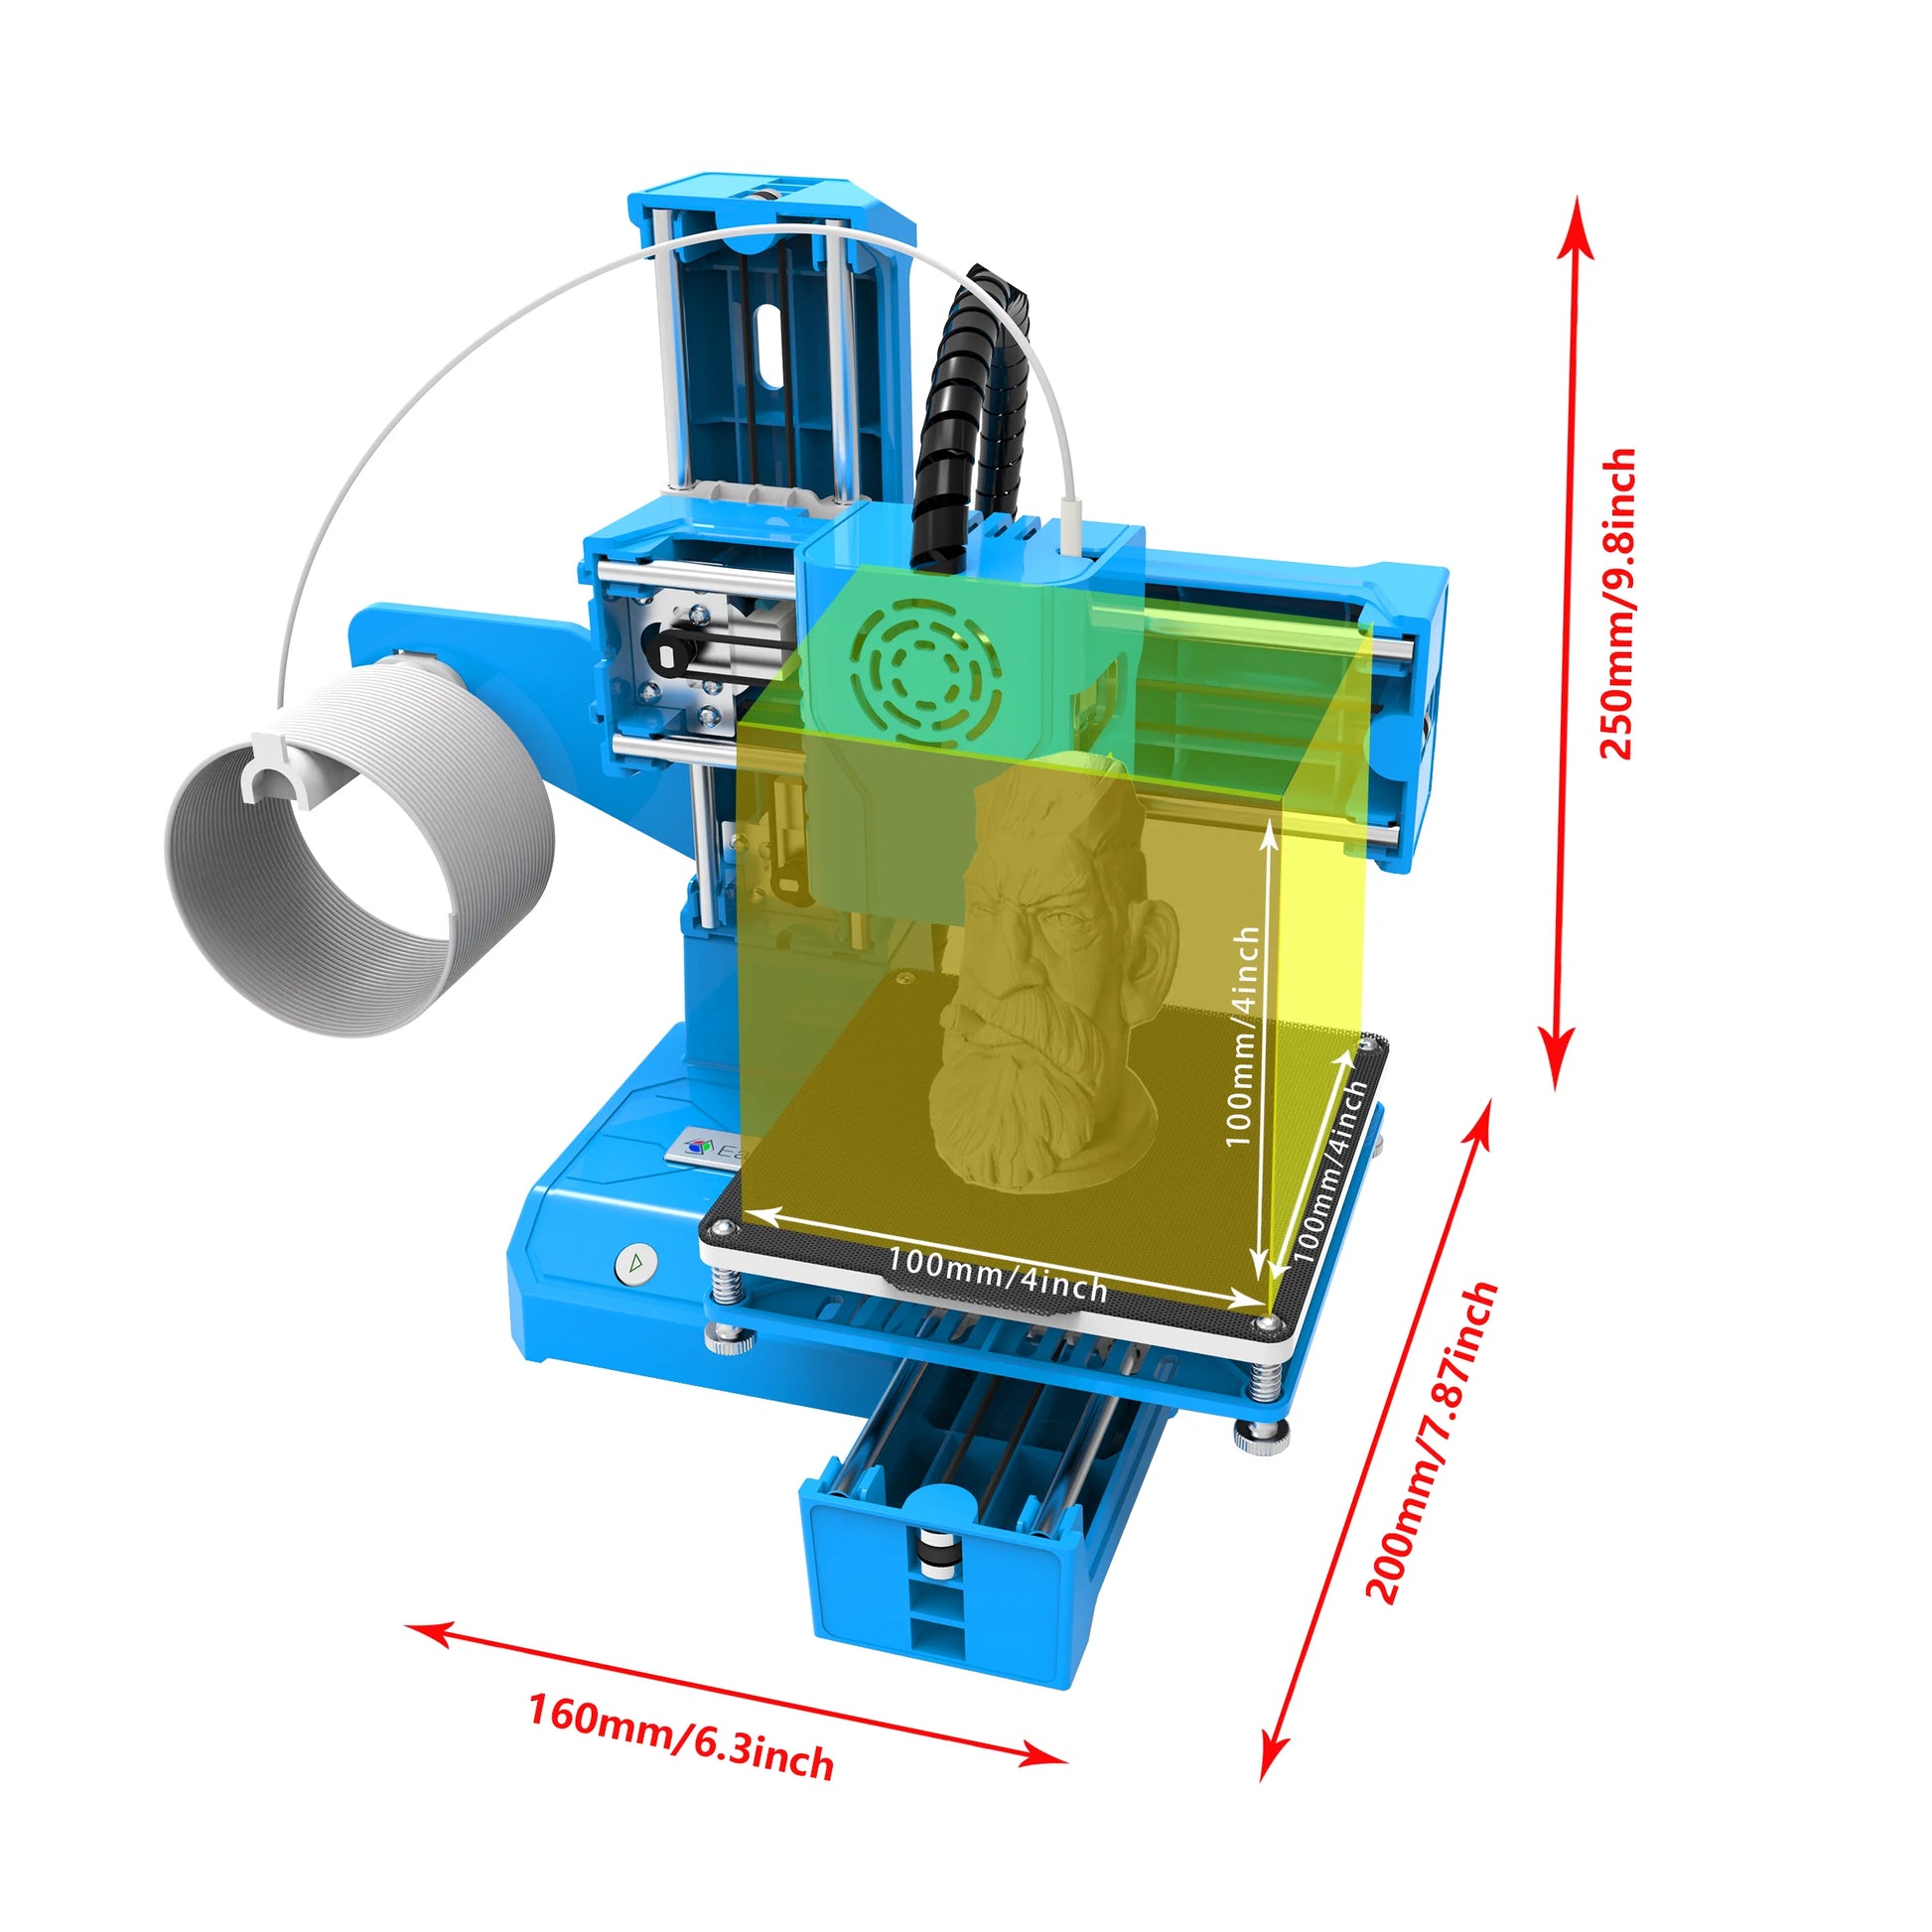 The Easy Thread K9 Mini 3D Printer is a powerful and user-friendly printer that makes 3D printing easy and efficient. With its easy thread function, you can quickly and effortlessly change filament, saving you time and hassle. Enjoy high-quality prints and bring your ideas to life with this advanced printer.